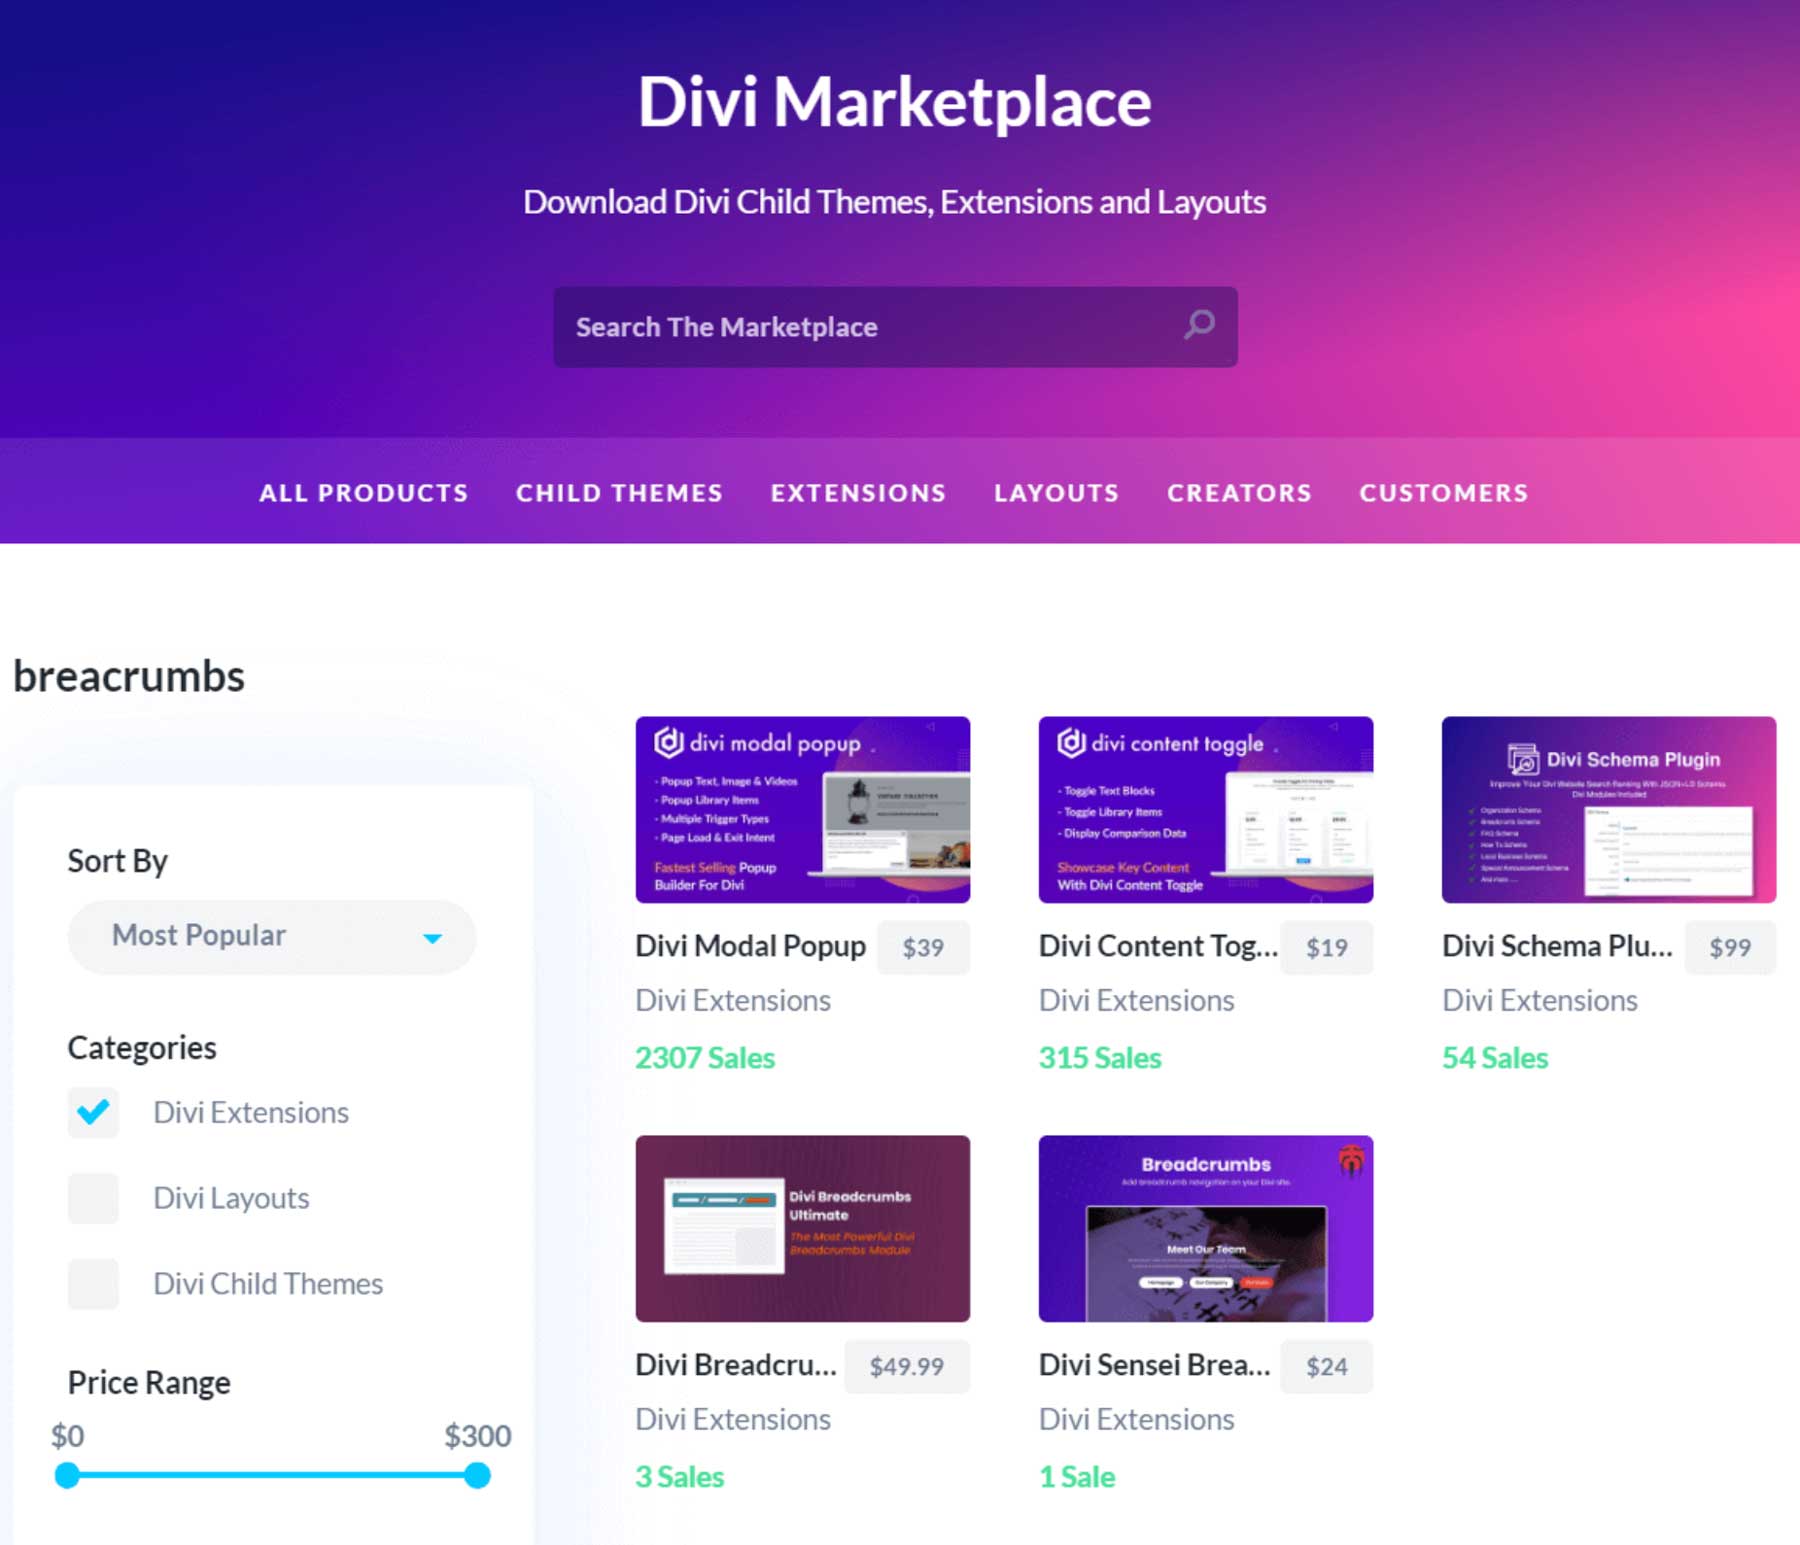 Looking through the Divi Marketplace